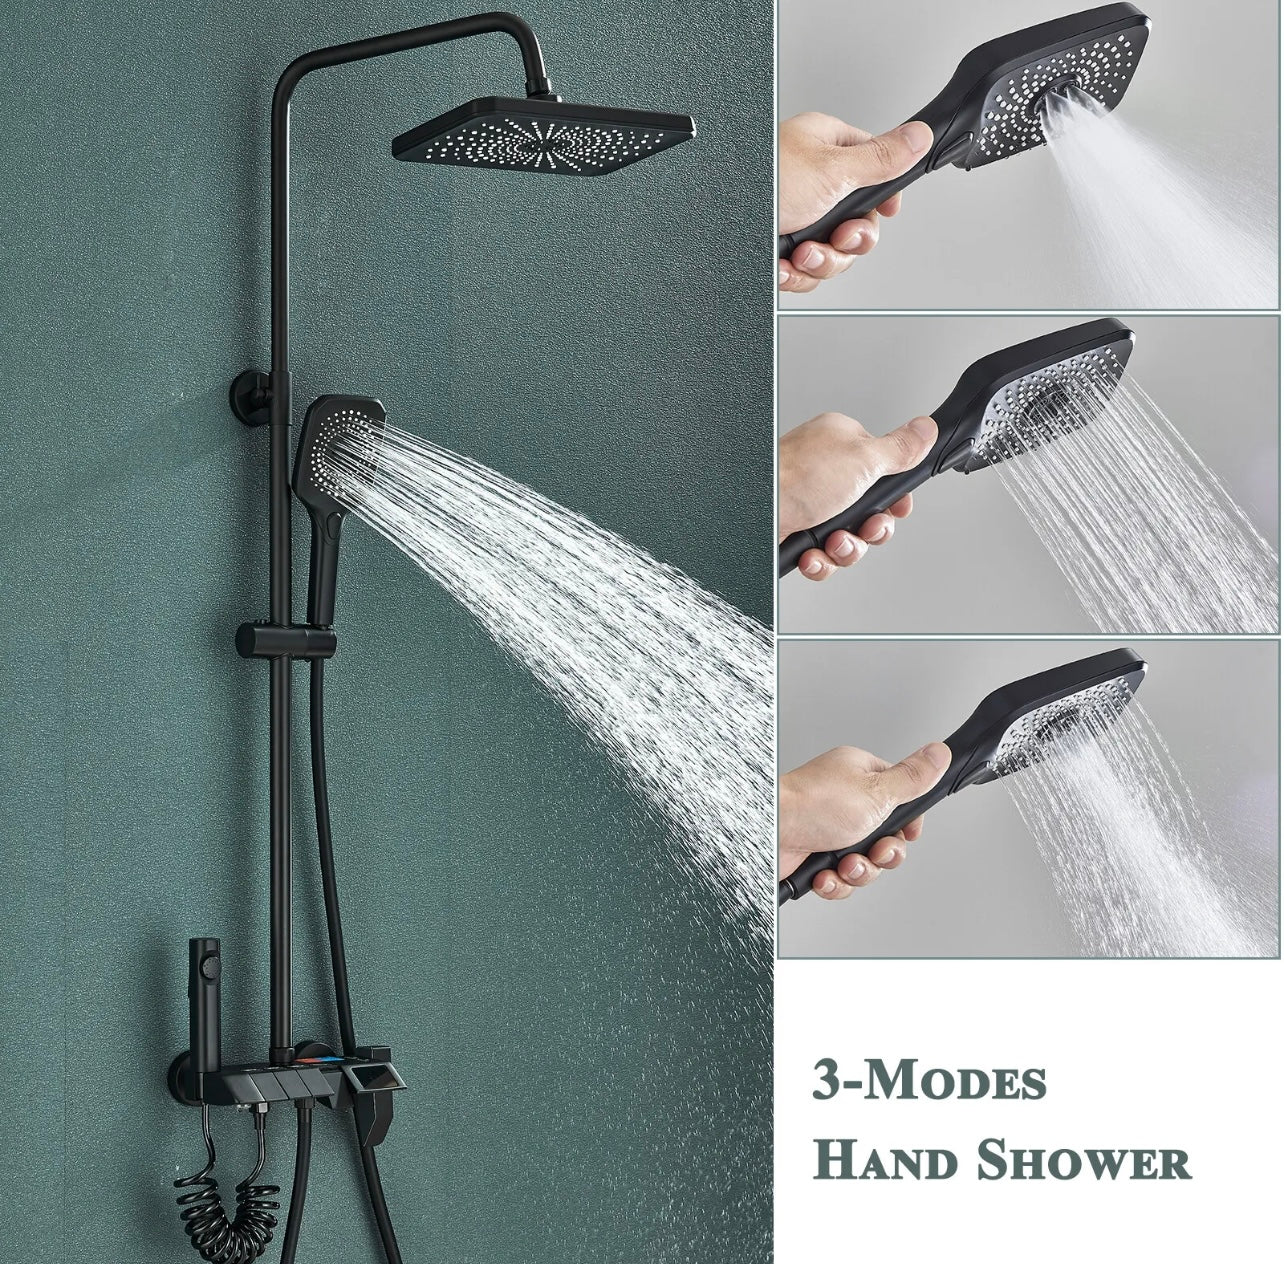 4 In 1 Slim Exposed Shower System Set Rain Shower Head Combo Shower Faucet Fixtures W/LCD Display